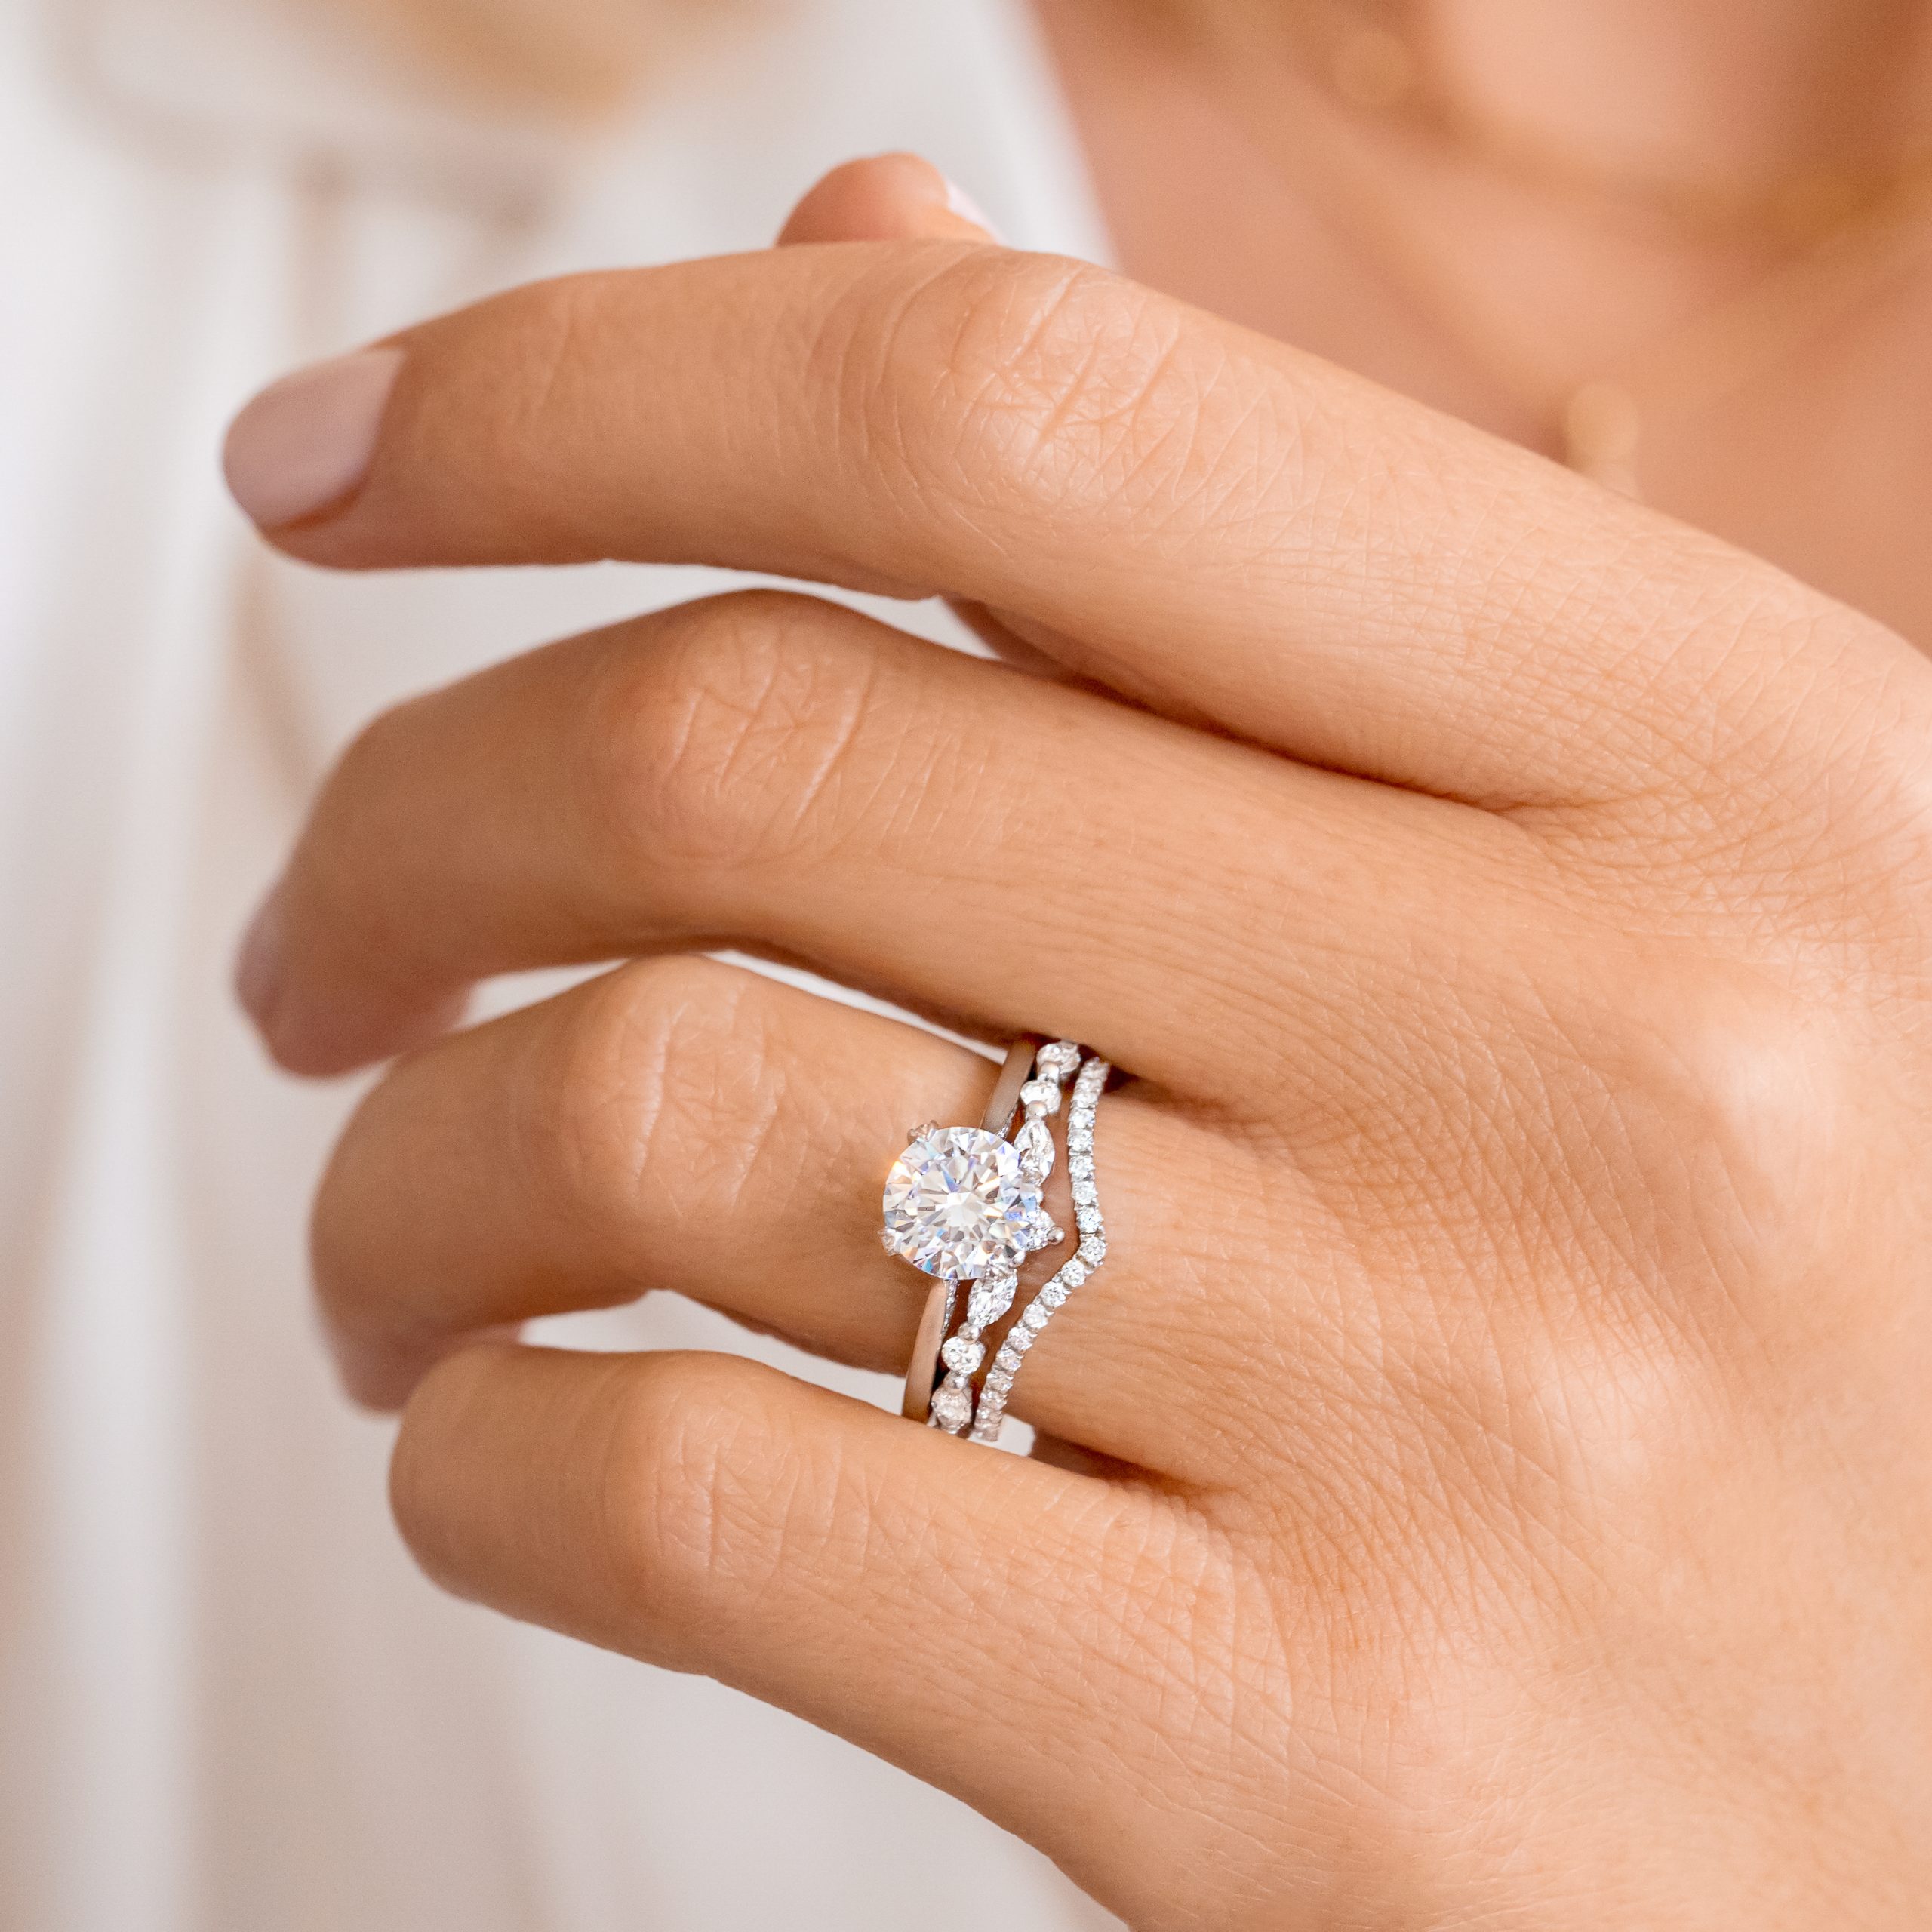 Buying a vintage-style engagement ring? What decade are you?